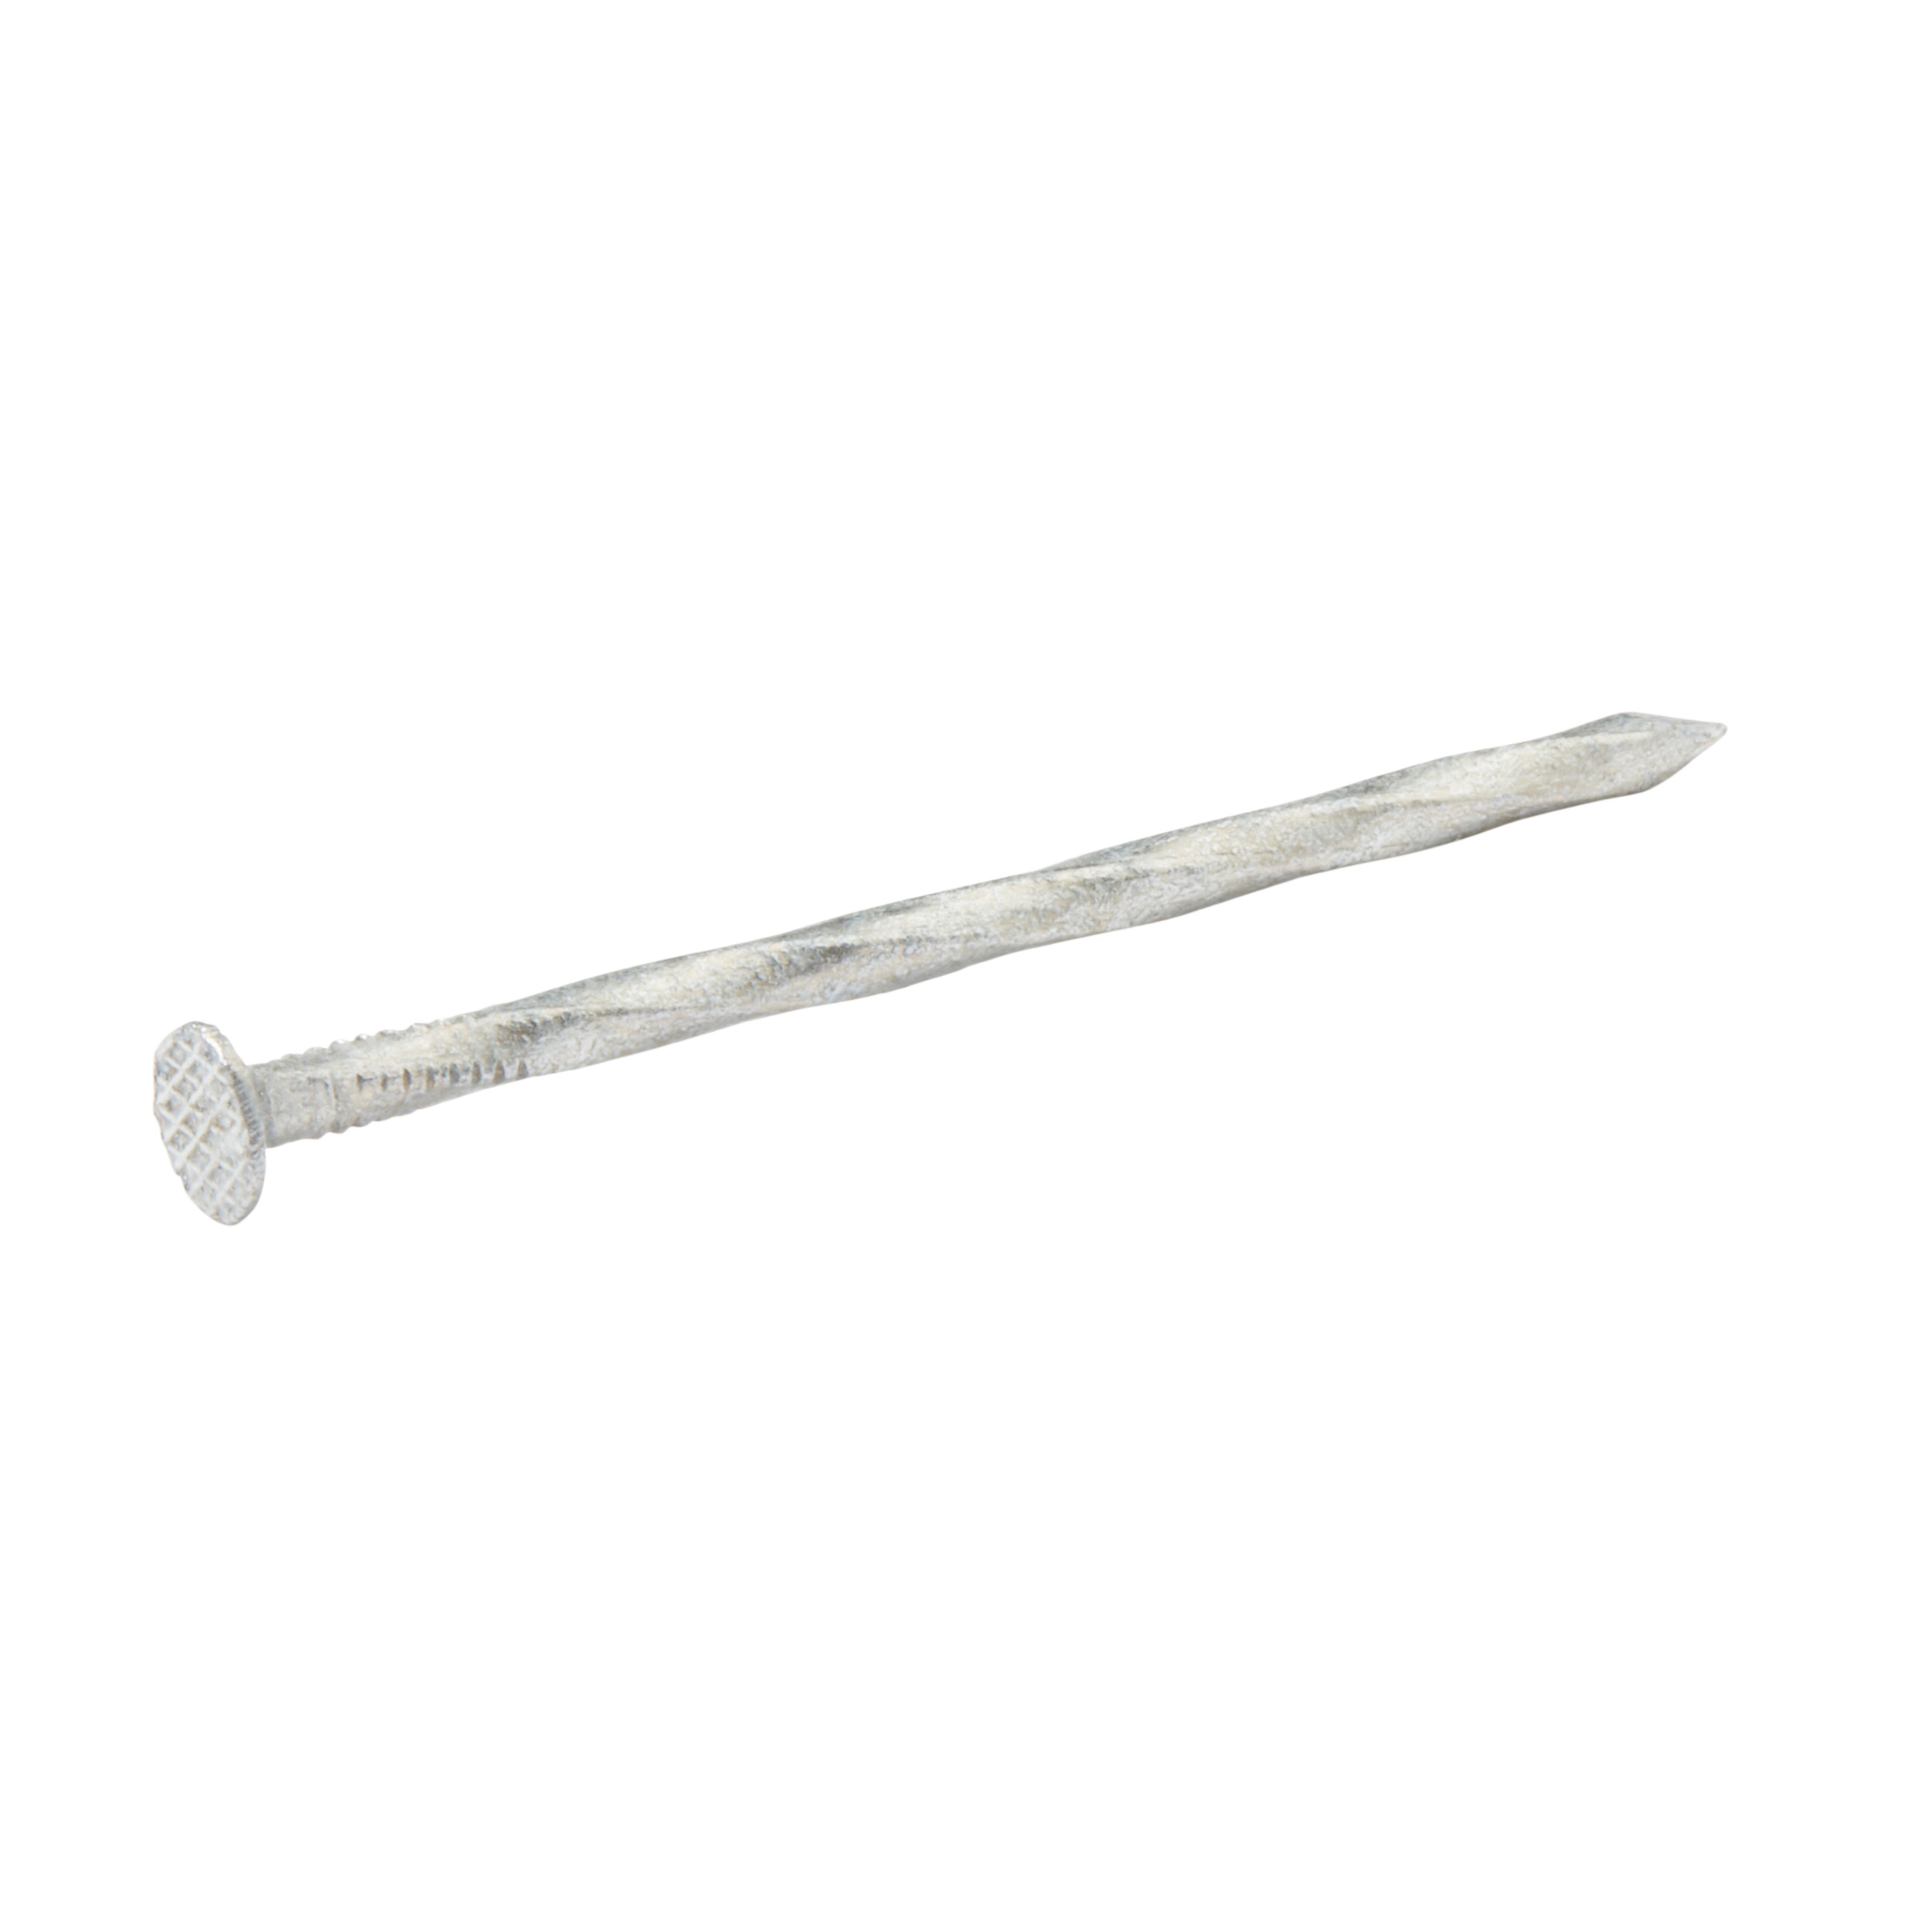 Diall Galvanised Twisted nail (L)70mm (Dia)3.4mm 125g